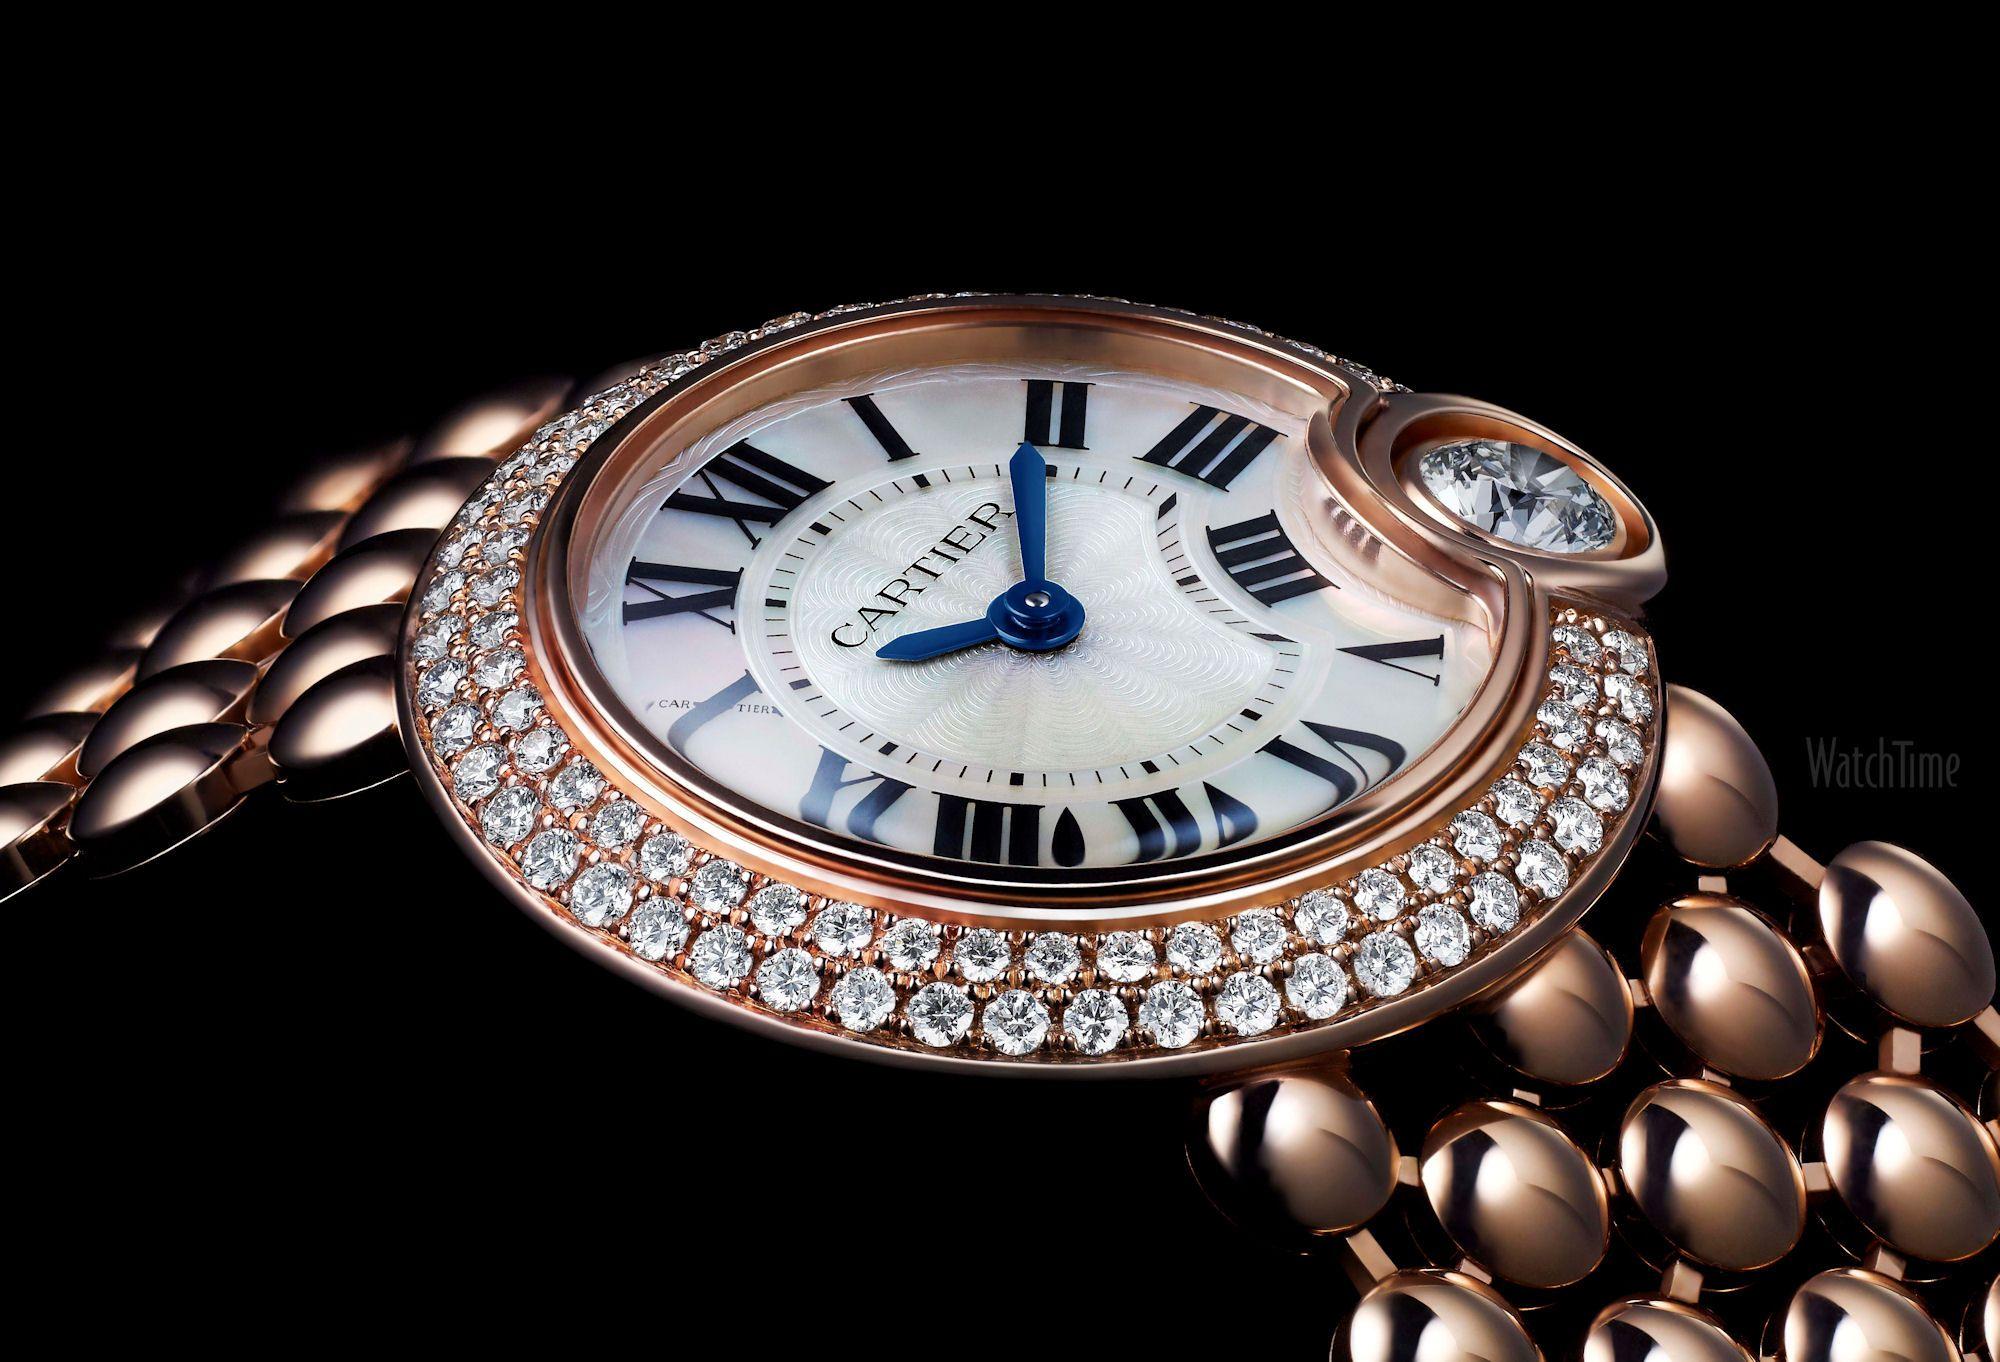 Watch Wallpaper: 11 Cartier Watches from SIHH. WatchTime's